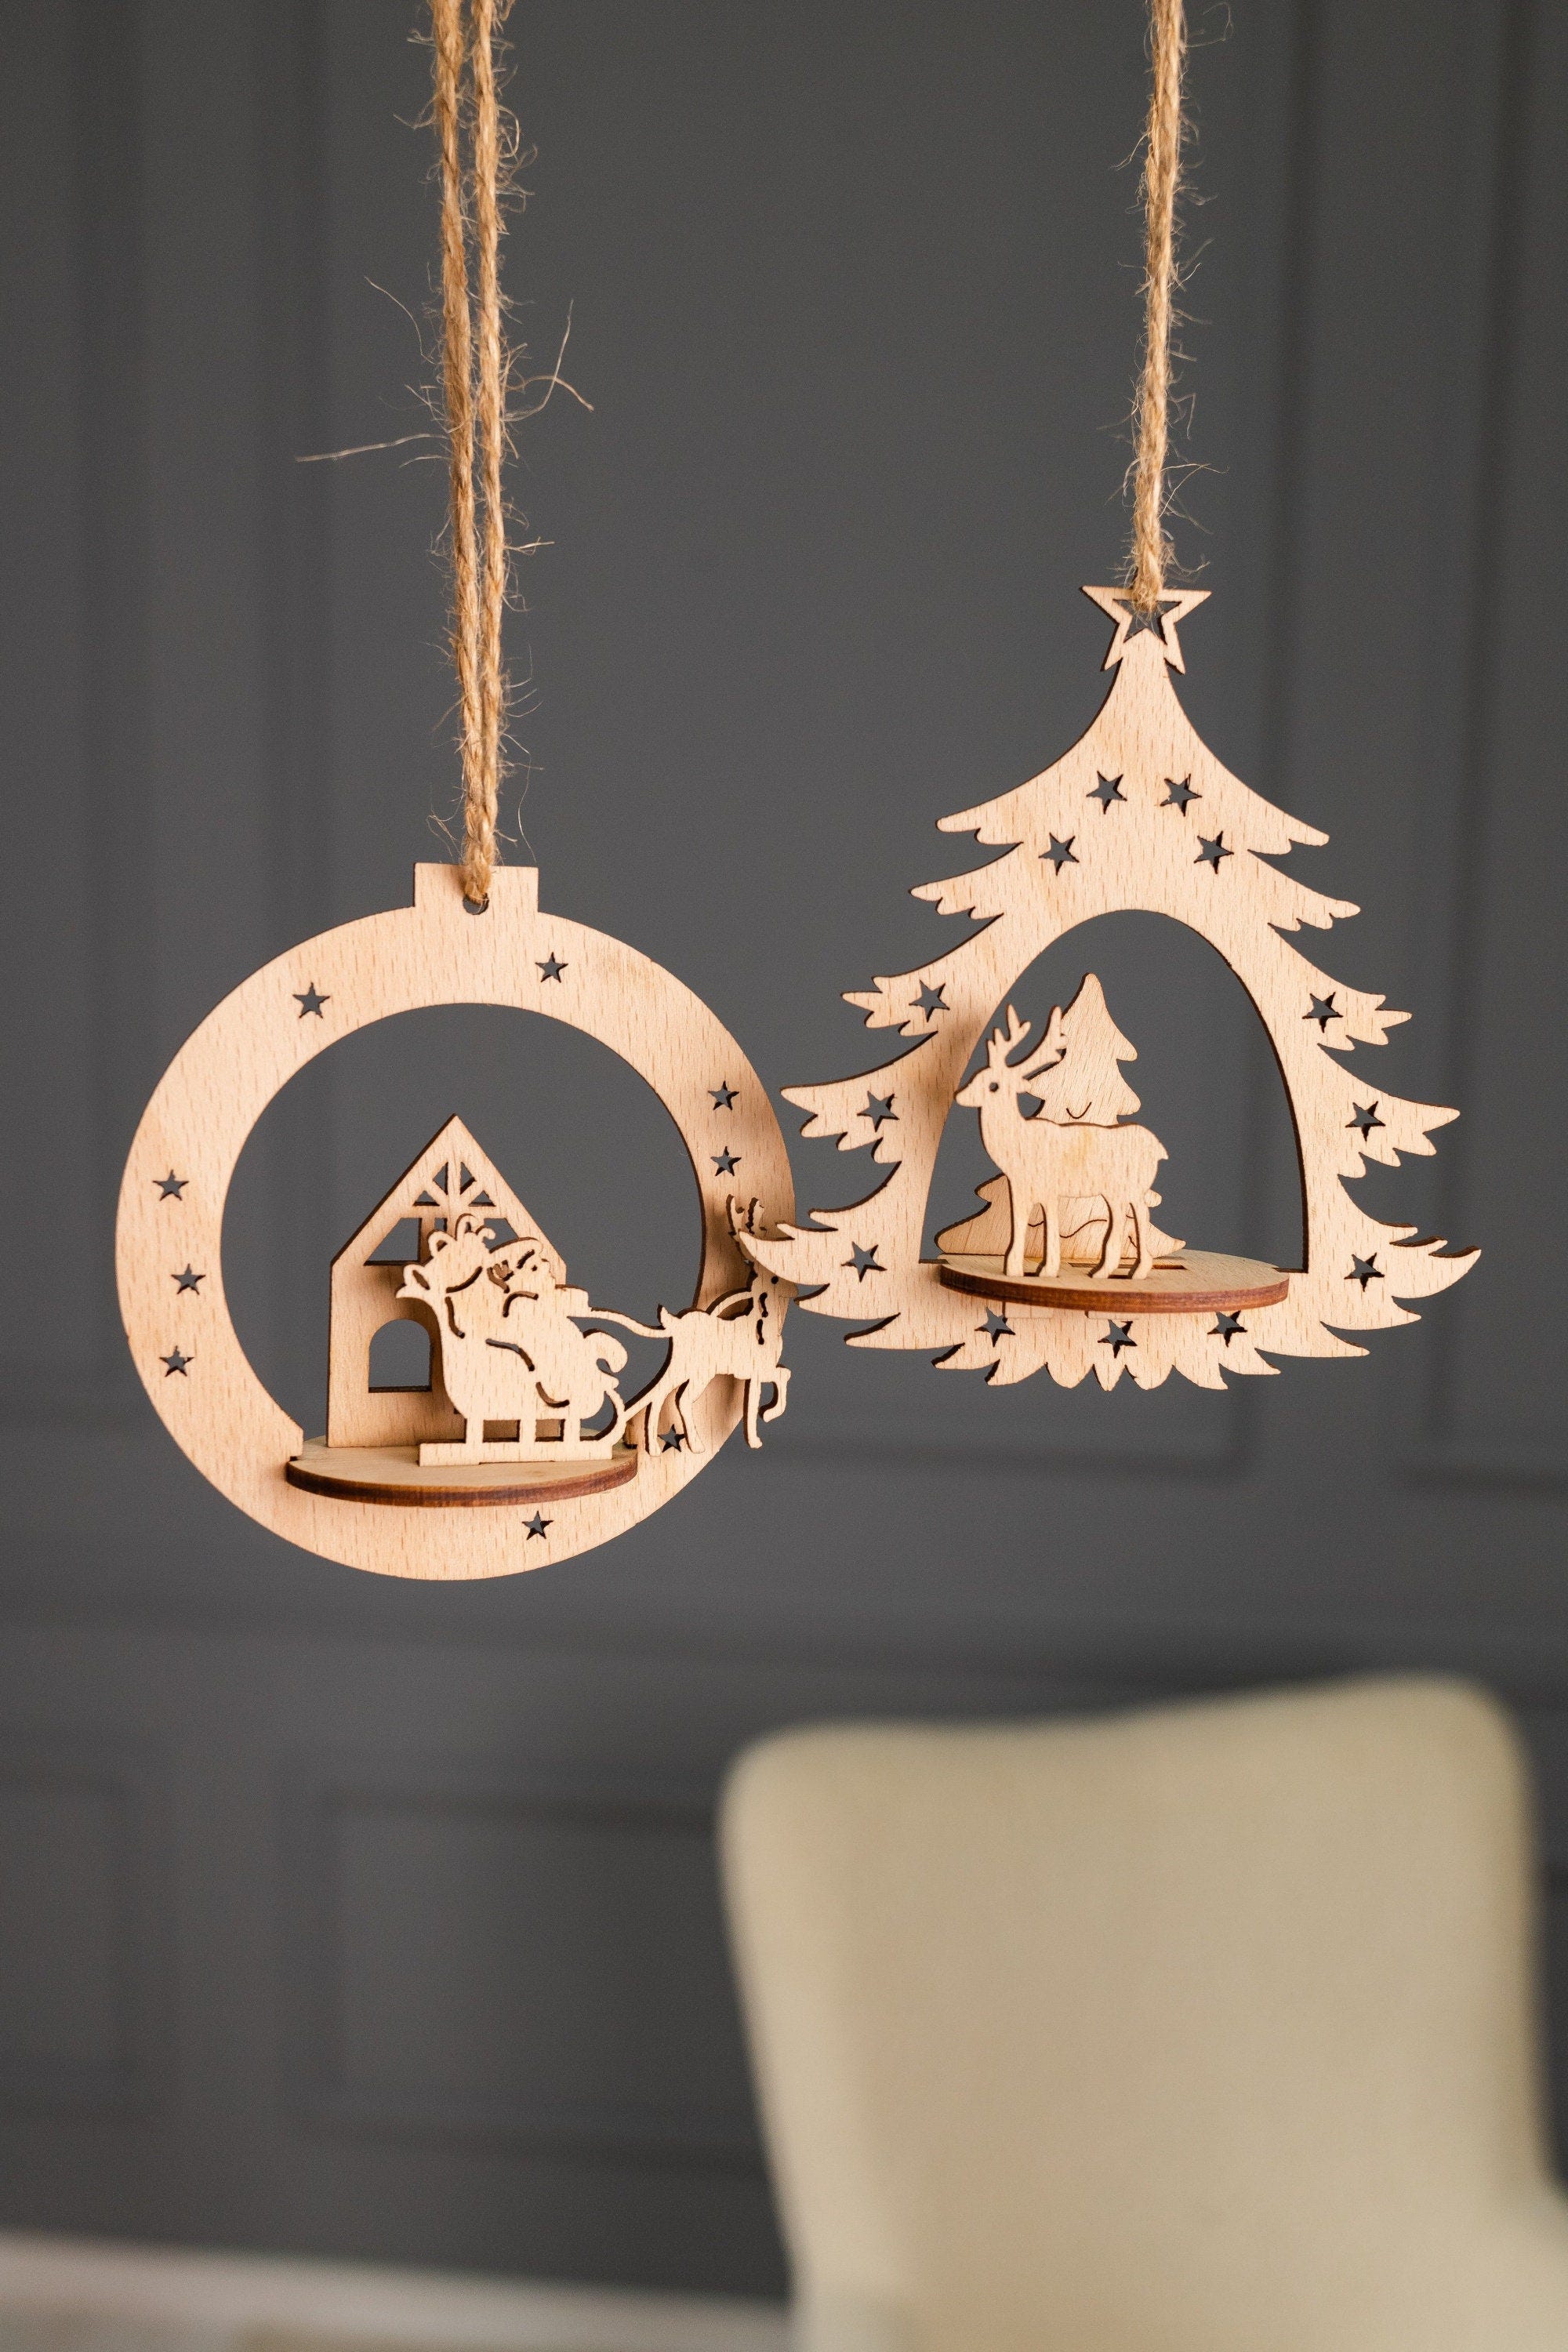 Laser cut wooden 3D Christmas ball ornament svg Glowforge christmas bauble ornaments tree decororation svg cricut Christmas dxf template